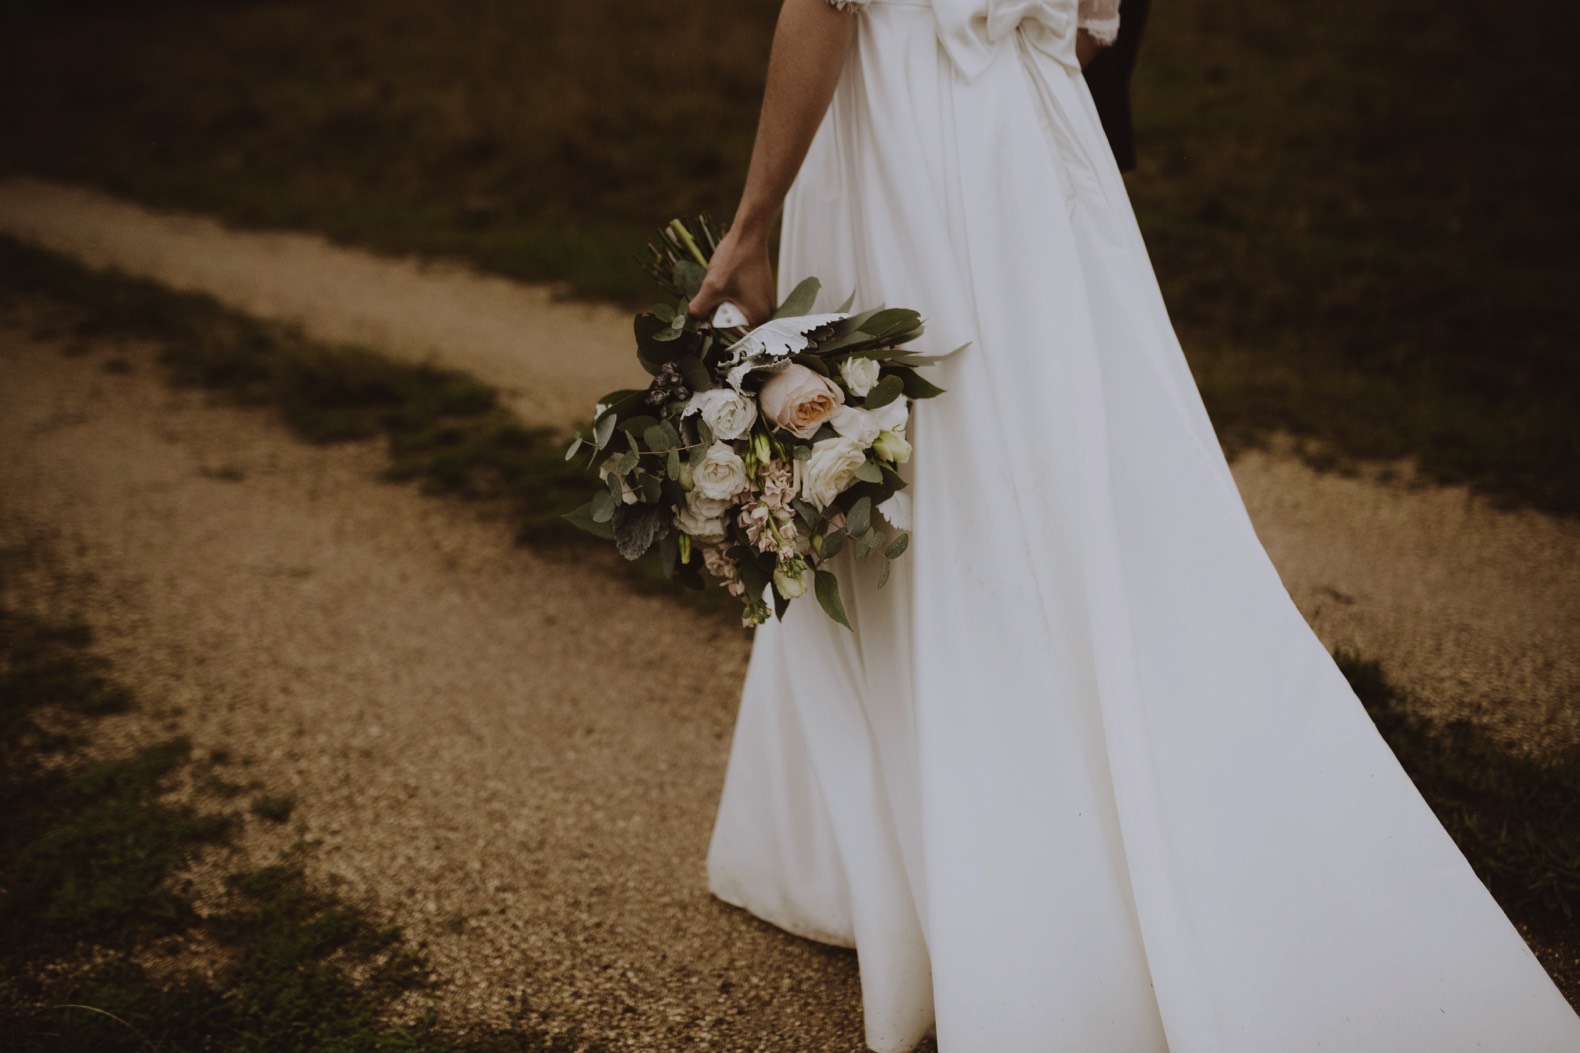 detail photo of bride holding flowers against her wedding dress